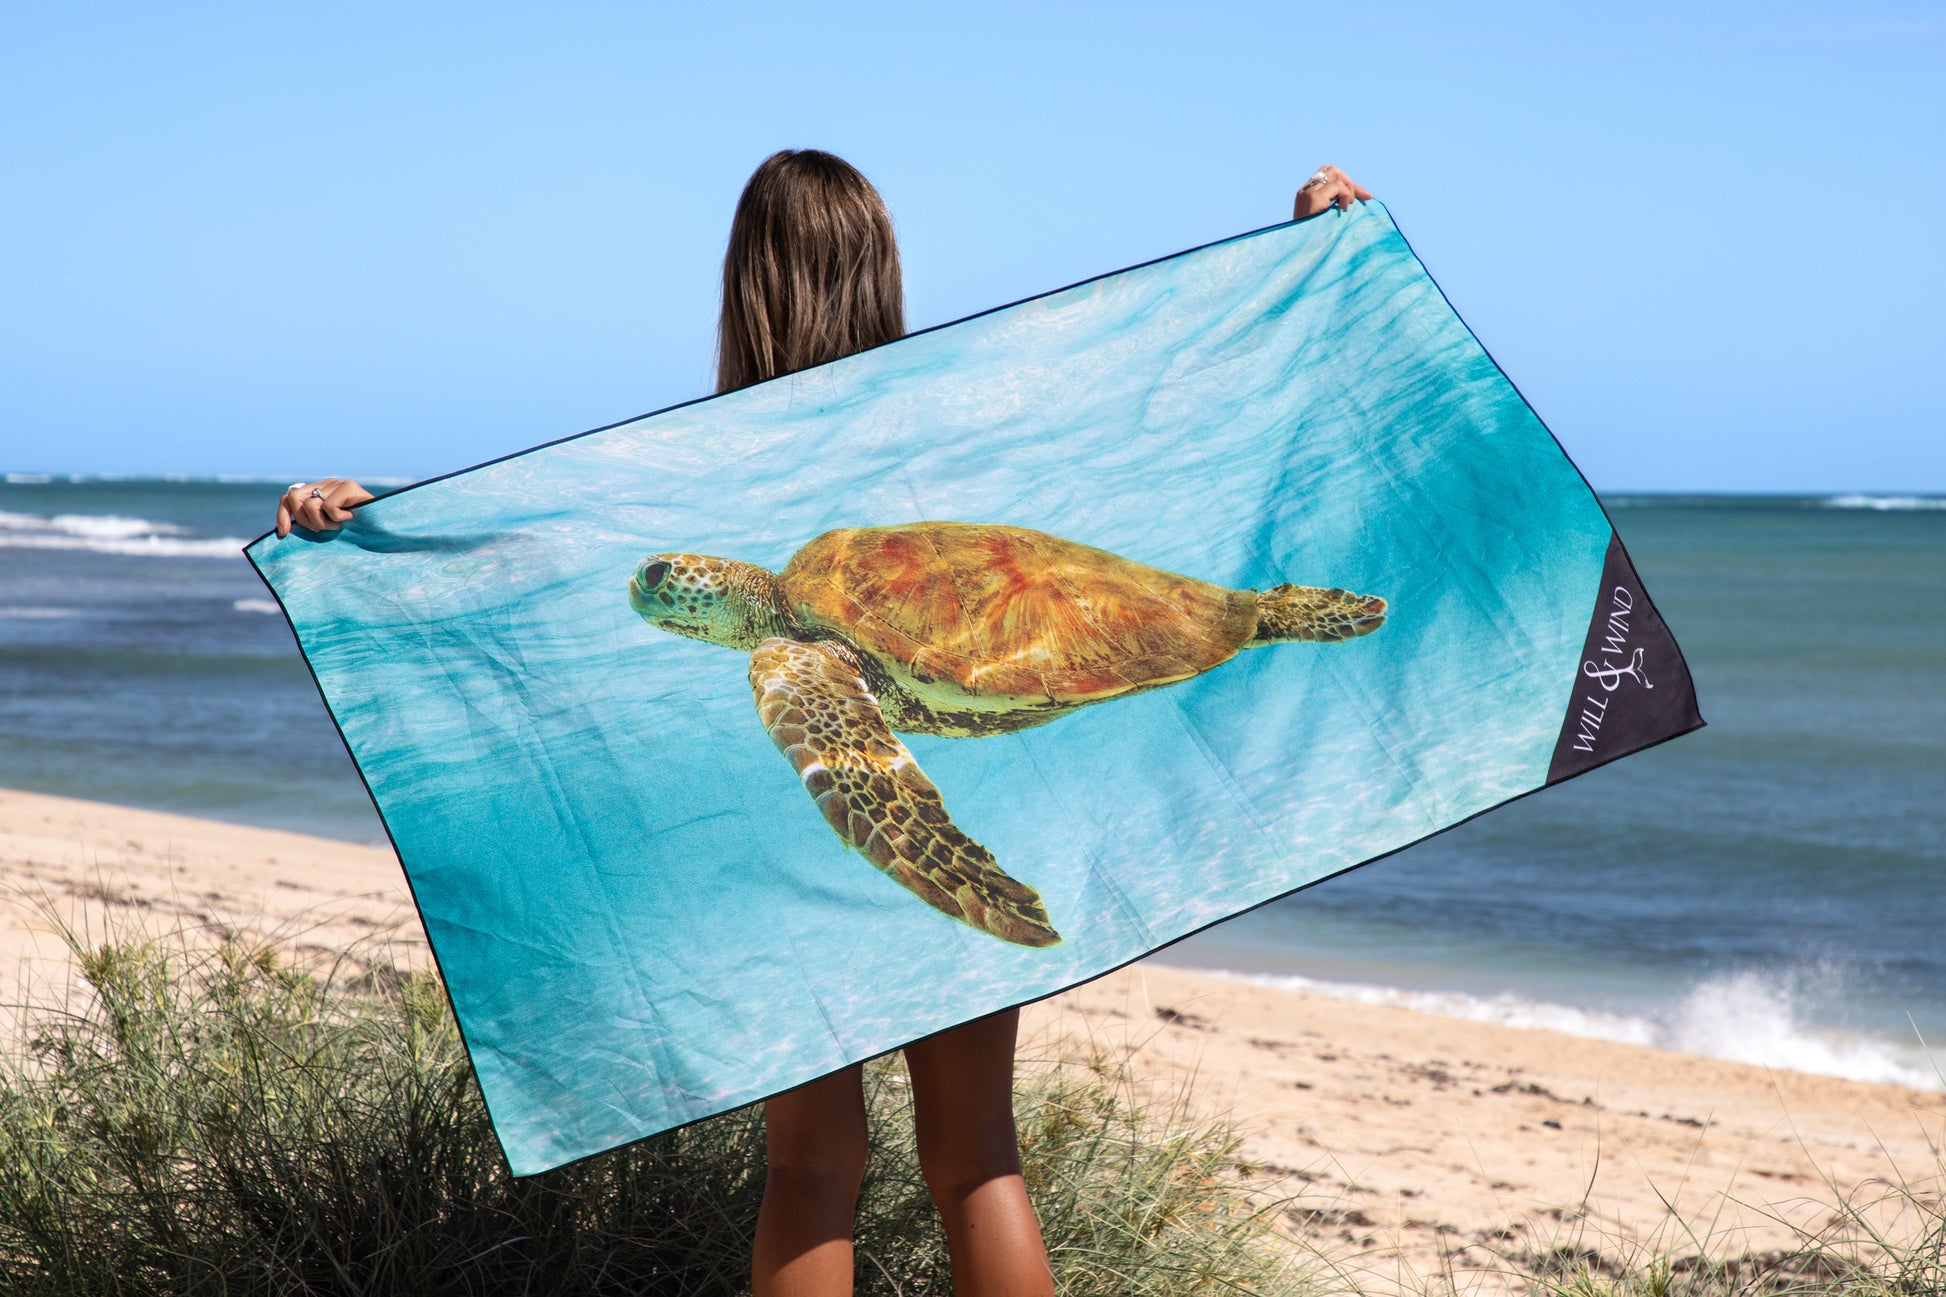 Green Sea Turtle Travel Towel.Inspired by the placid nature of the Ningaloo Green Sea Turtle.This guy gracefully swam out into the blue and followed us around for hours.Sand Free, Quick Dry Travel Towel For the beach, travelling, camping, exercising and more! Sustainably made using post-consumer plastic in the form of recycled Polyester (rPET)in our signature buttery soft Microfiber Suede$64.99Will and Wind